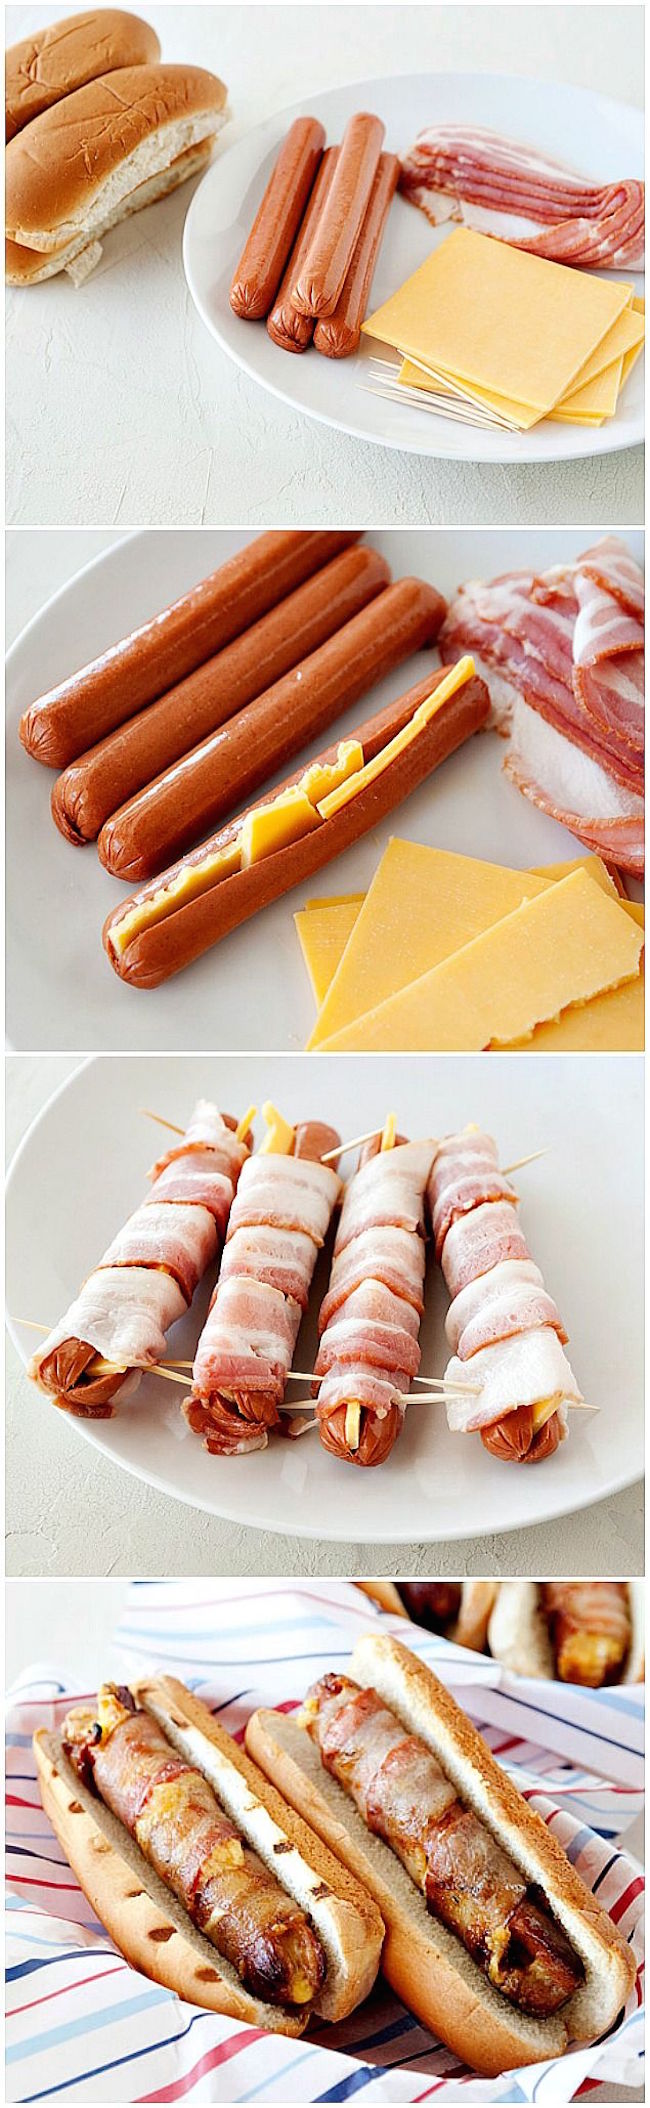 Make irresistible cheese-stuffed and bacon-wrapped hot dogs plus 15 genius hot dog hacks!